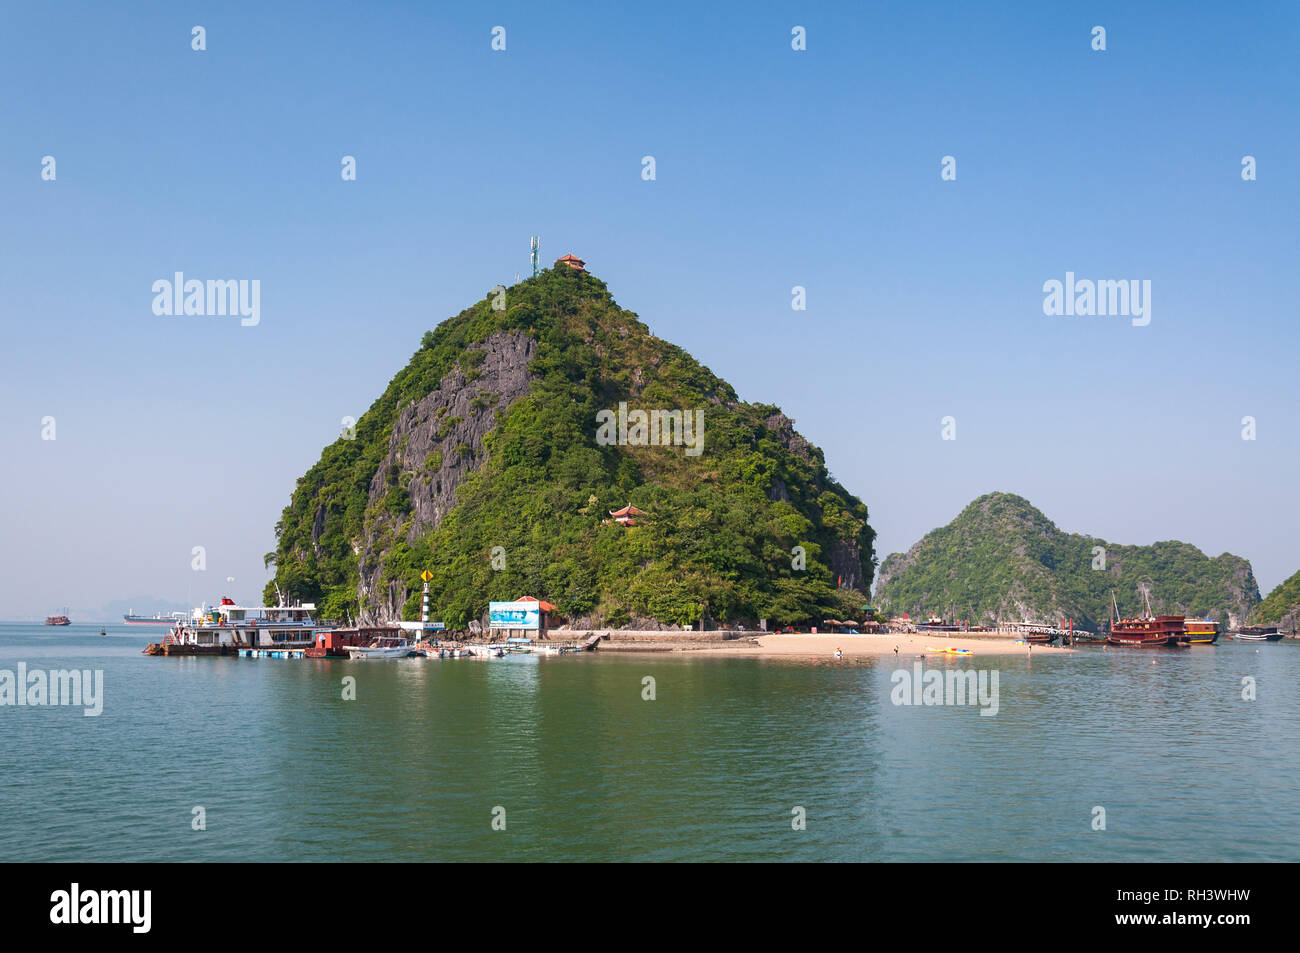 Ti Top beach or Bai bien Ti Top with wooden junk boats anchored off shore on a sunny afternoon, Halong or Ha Long Bay, Vietnam Stock Photo